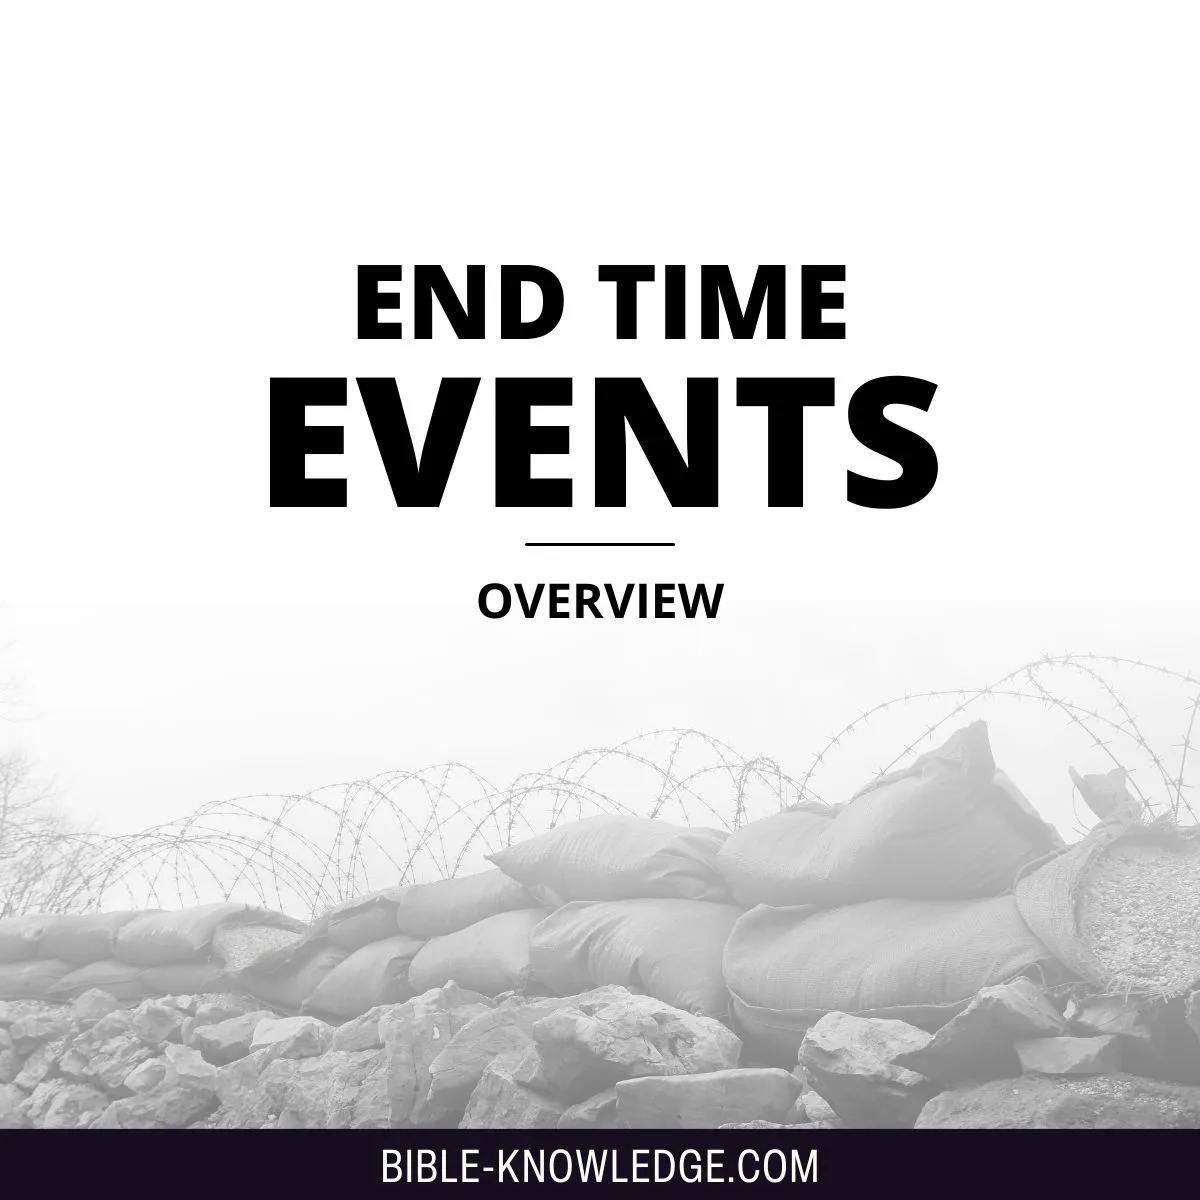 End Time Events Overview